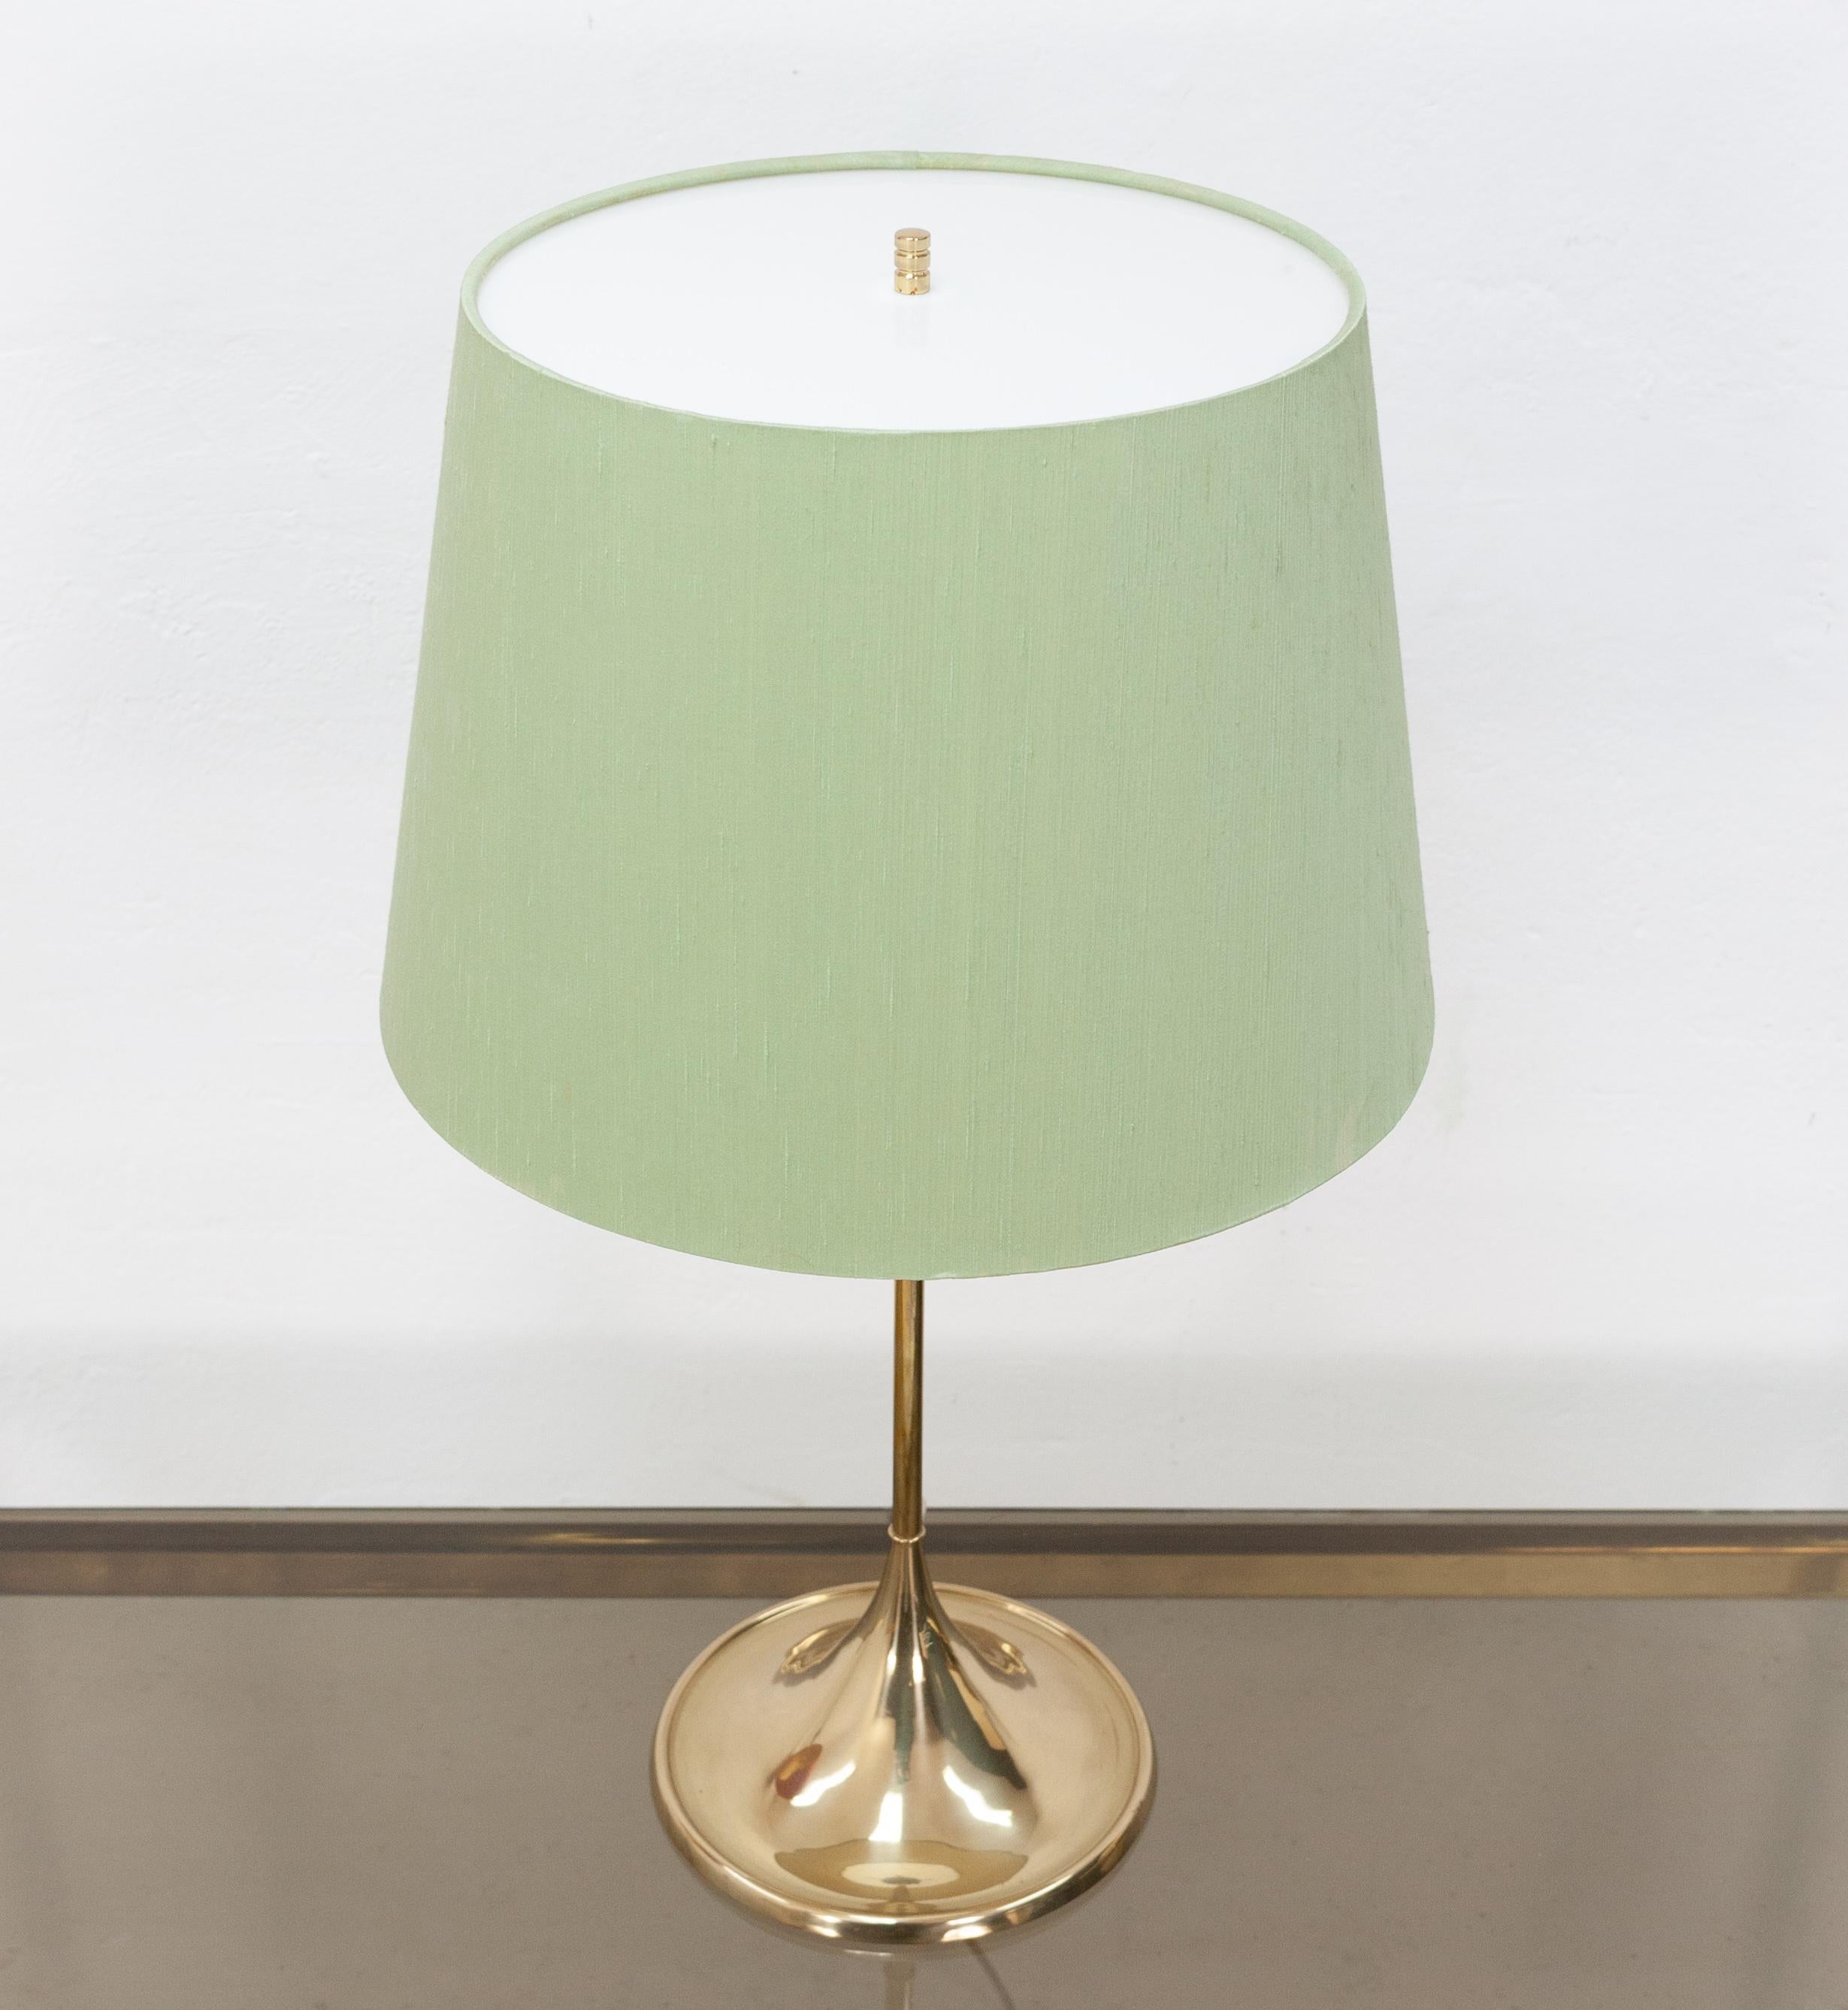 Beautiful table version of the iconic Bergbom design. Model B-024 cast iron base finished in brass with an opaque white Perspex top on the light original green linen lampshade. Very nice condition.